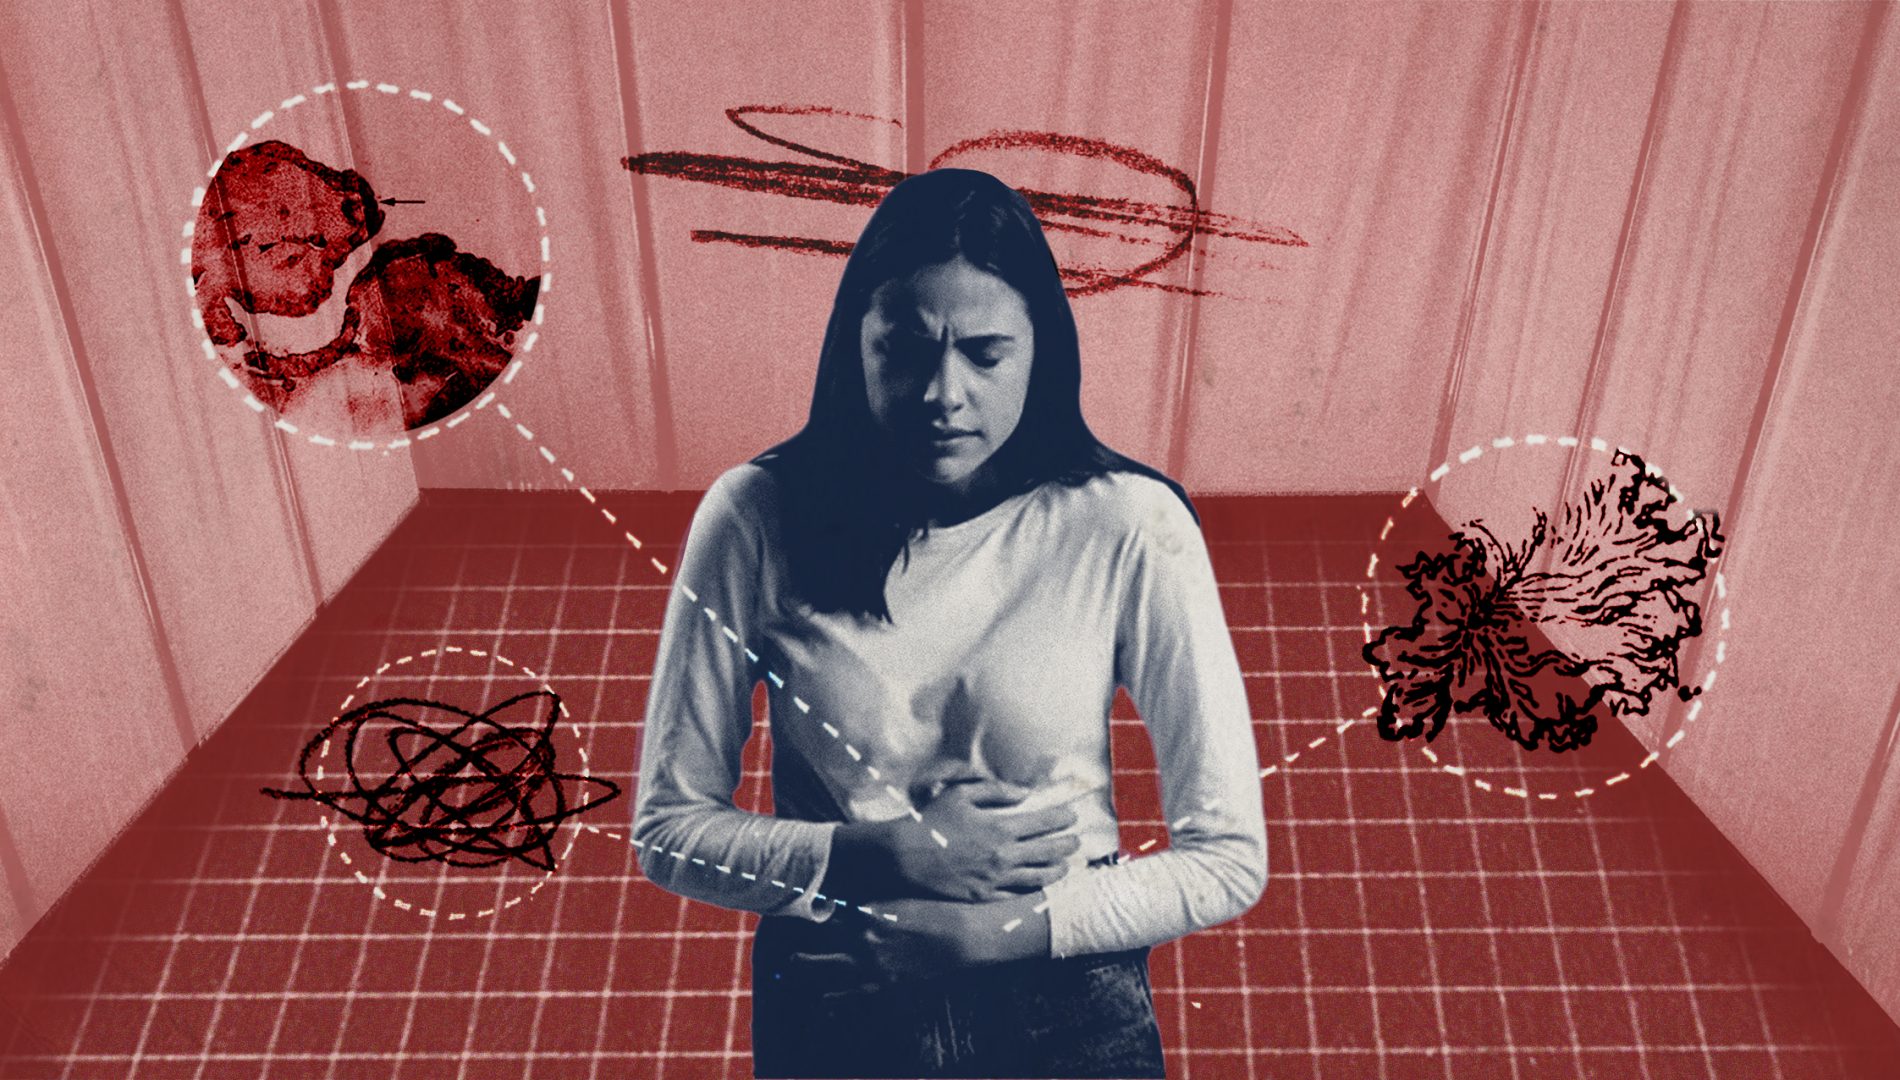 I was in so much pain I'd faint — yet doctors ignored me for decades